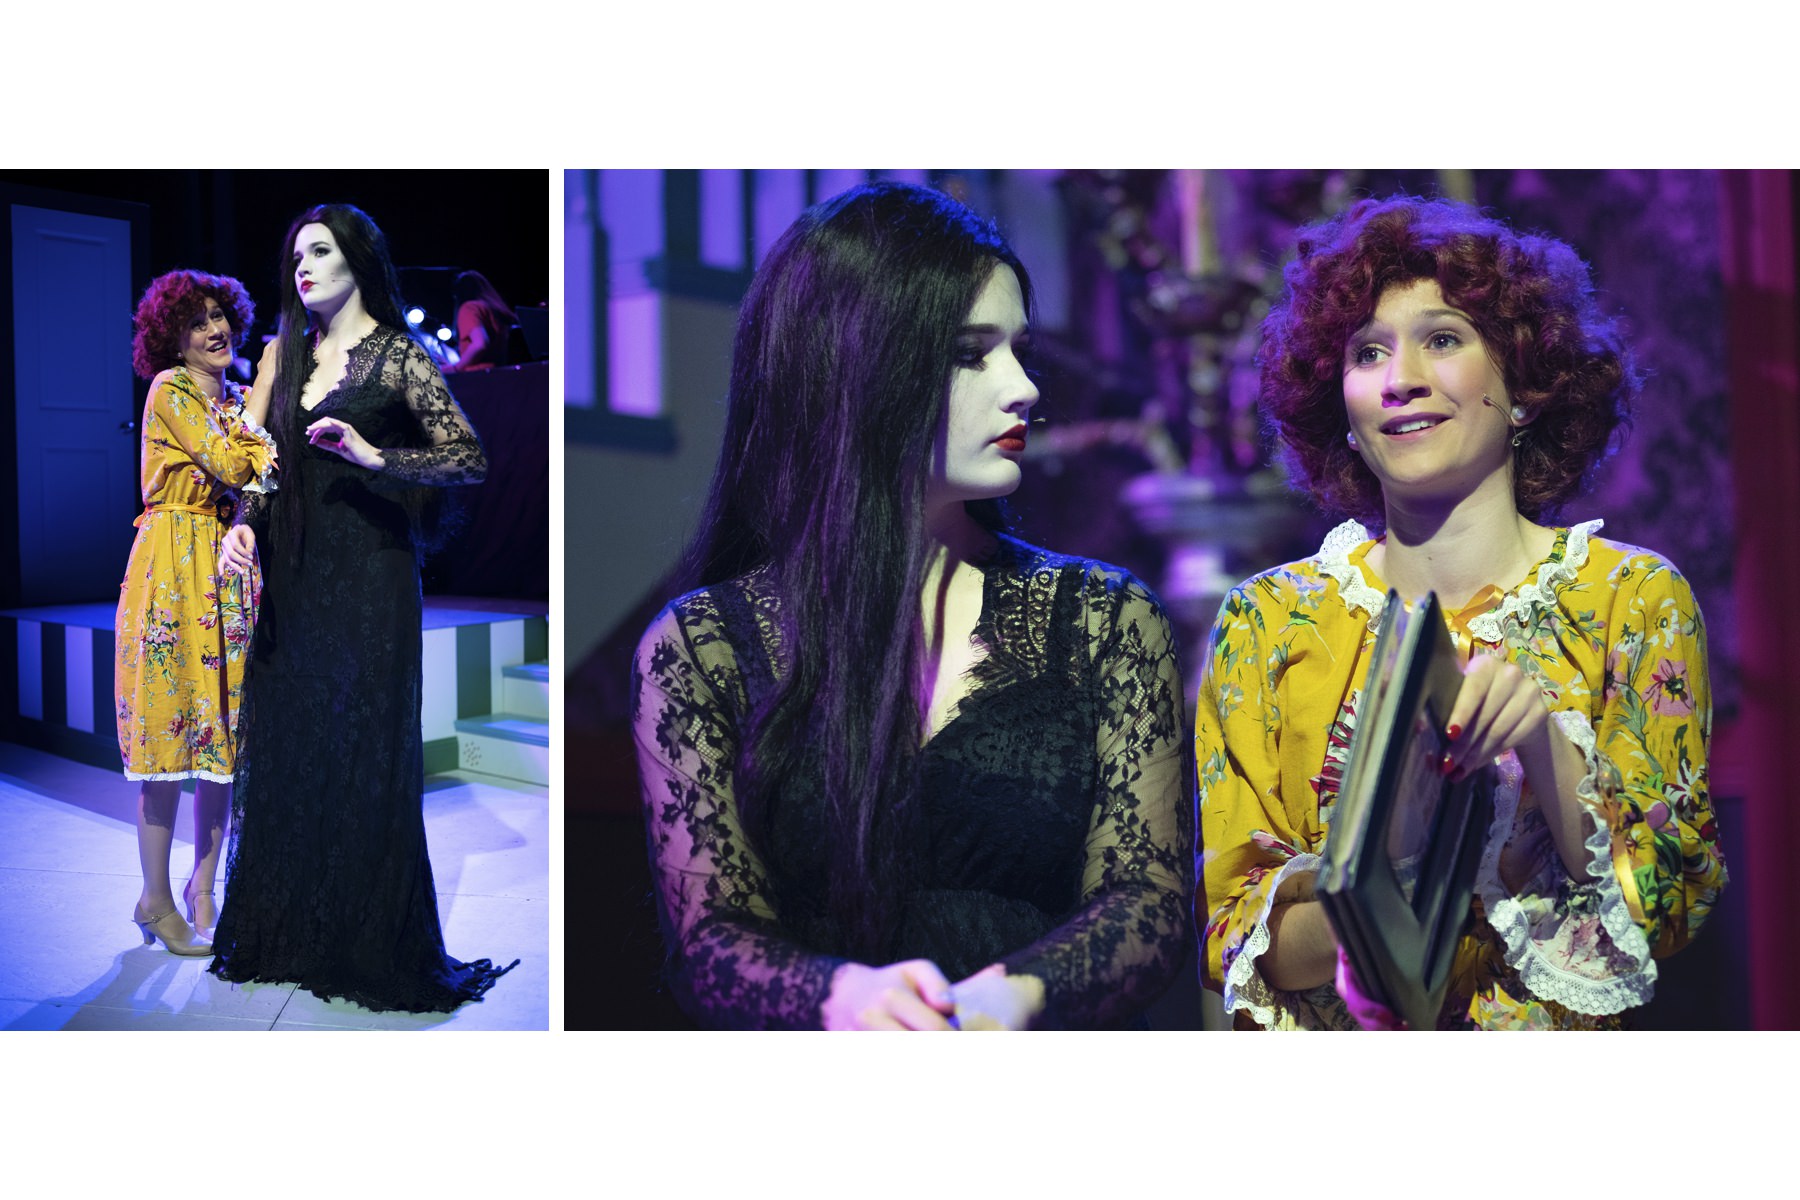 PLC Sydney - The Addams Family 2019 Photography by Christopher Hayles-0015.jpg